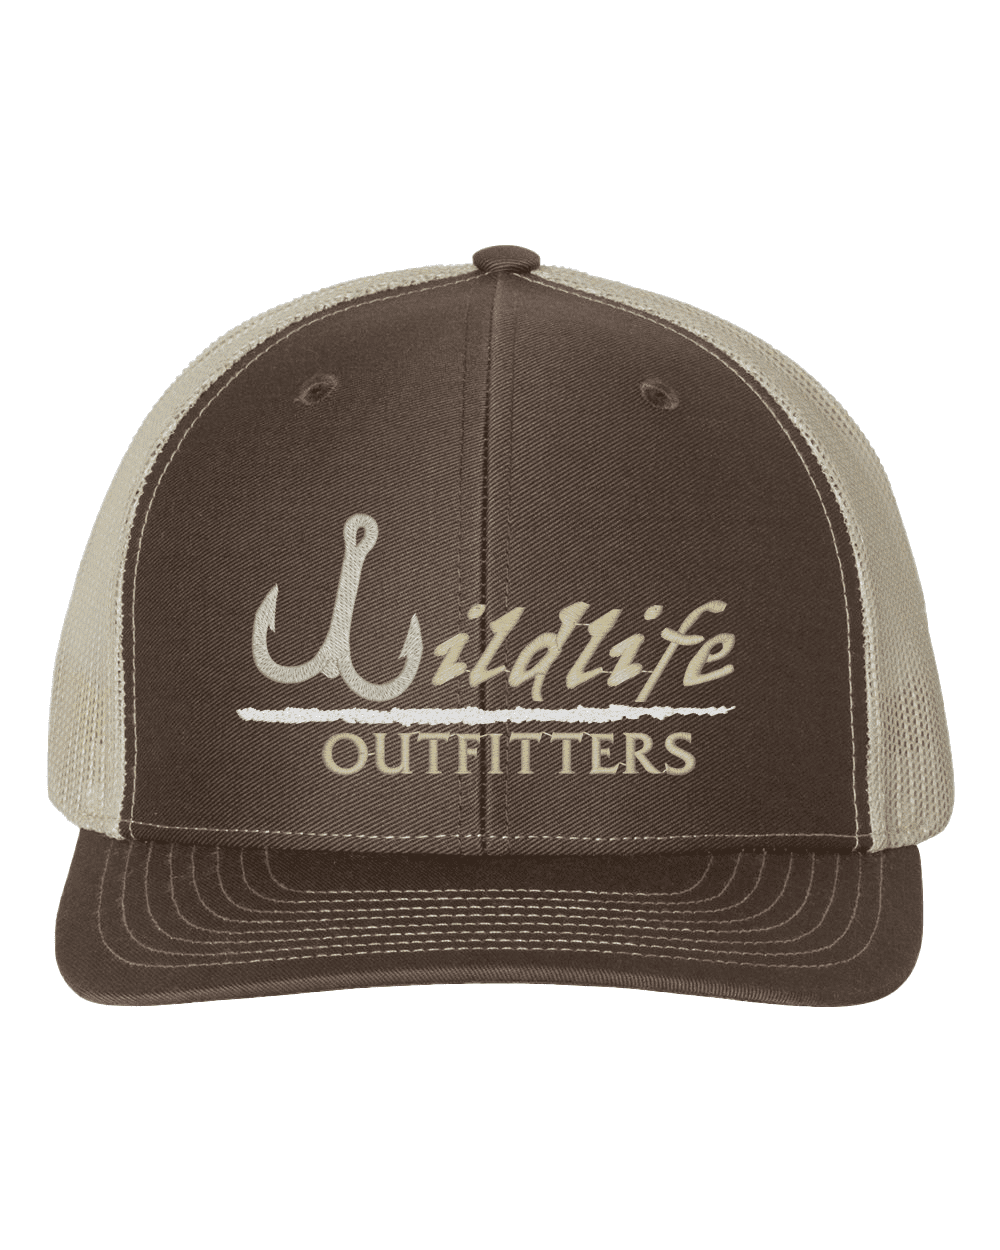 https://wildlifeoutfitters.com/wp-content/uploads/Brown-Khaki-112-Fishing.png